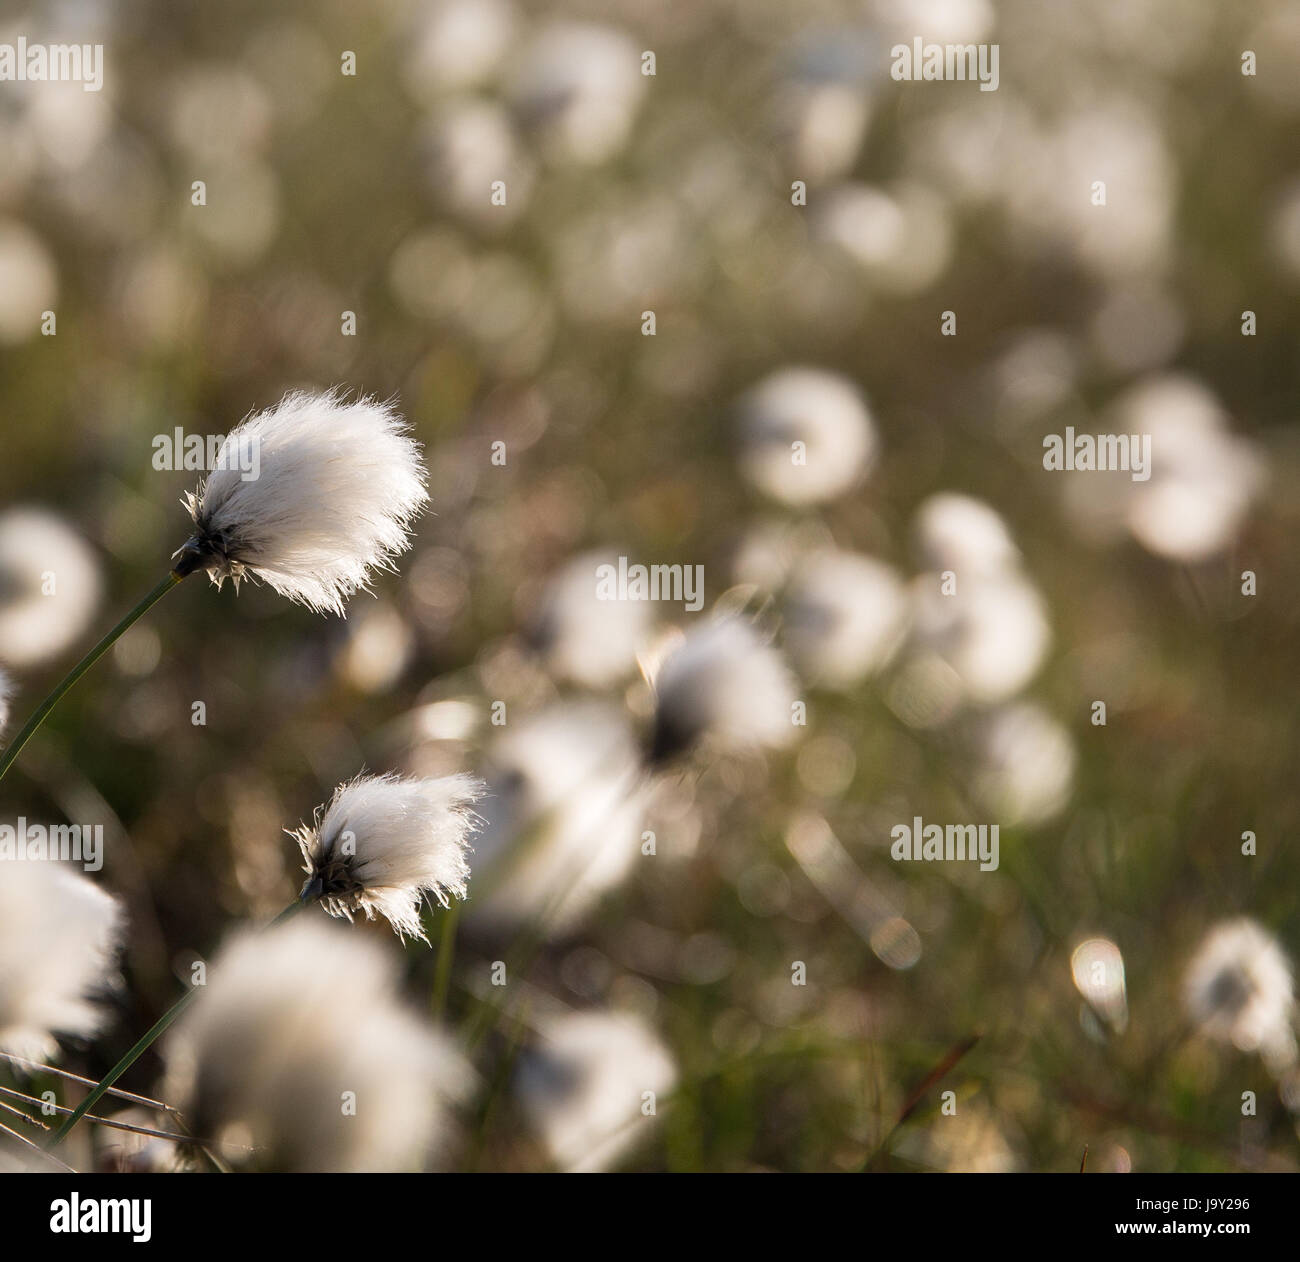 Shallow depth of field image of Common Cotton Grass photographed on the Isle of Kerrera, near Oban, Scotland just before sunset Stock Photo